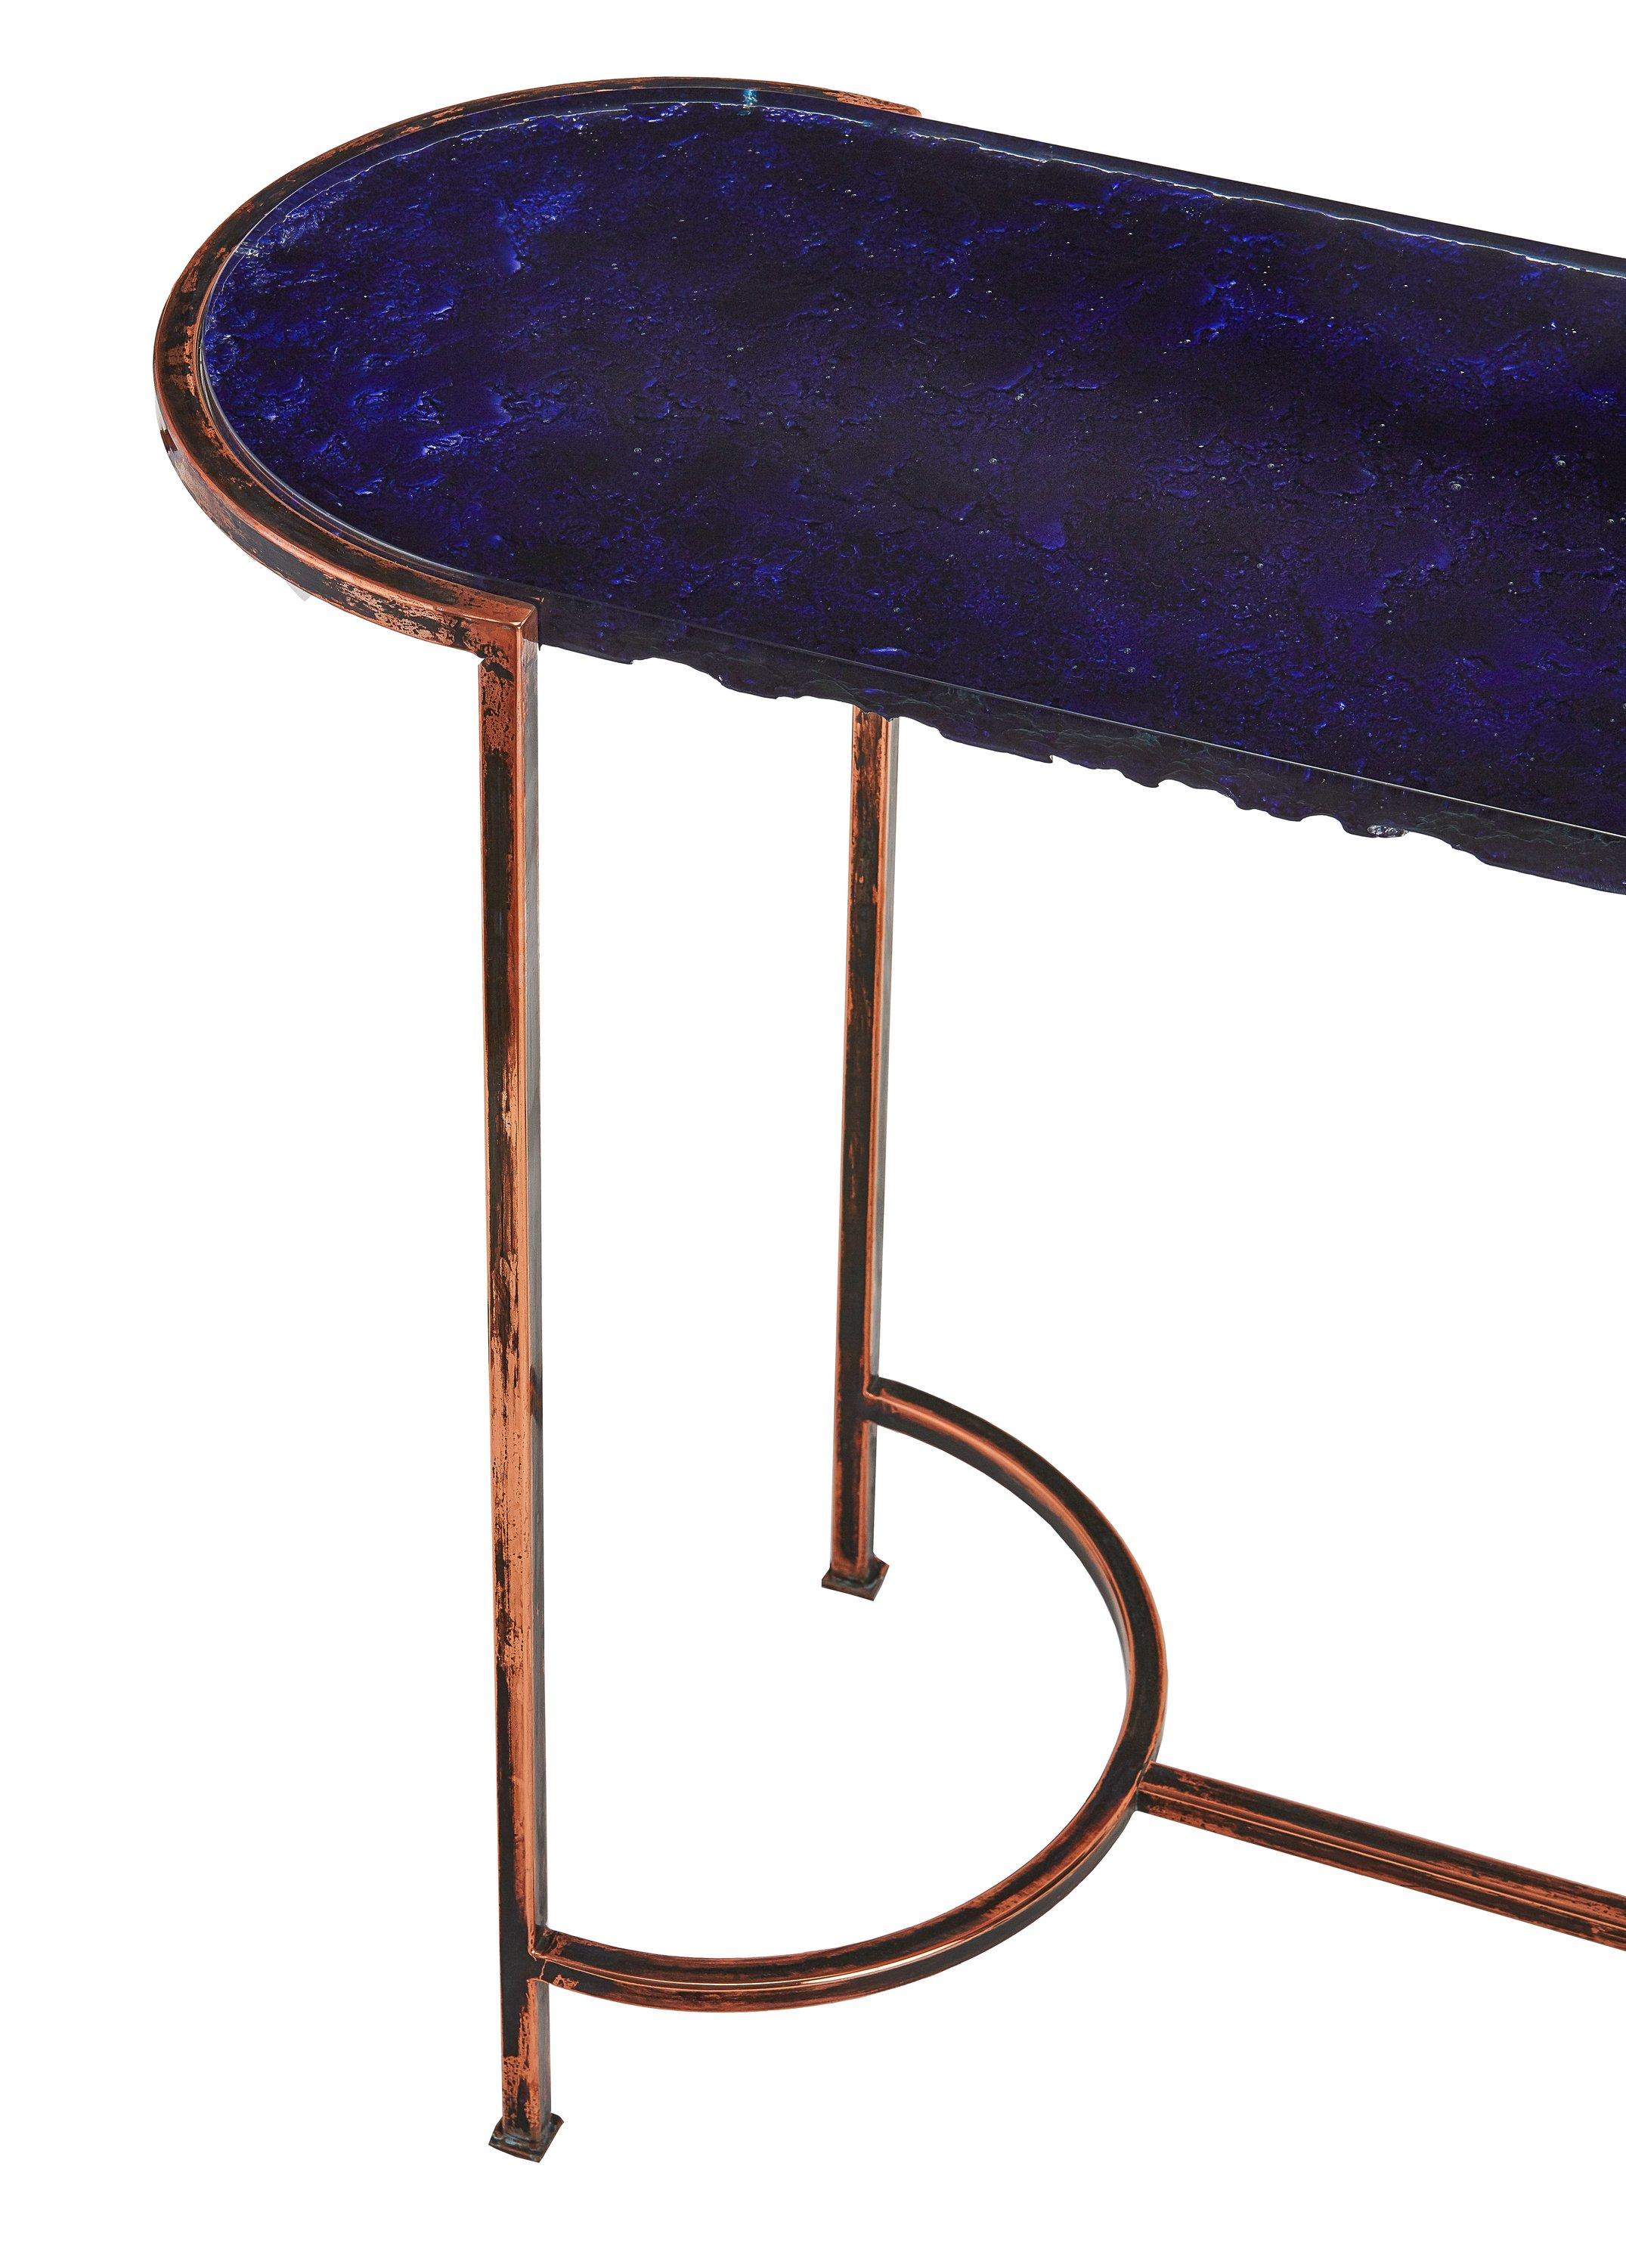 The oval blue glass console with a red copper frame has the shape and image of the eye of the blue mountain lake. The blue cast glass top is 26 mm thick and its backside has silvered irregular wavy texture which looks like moving water. The steel